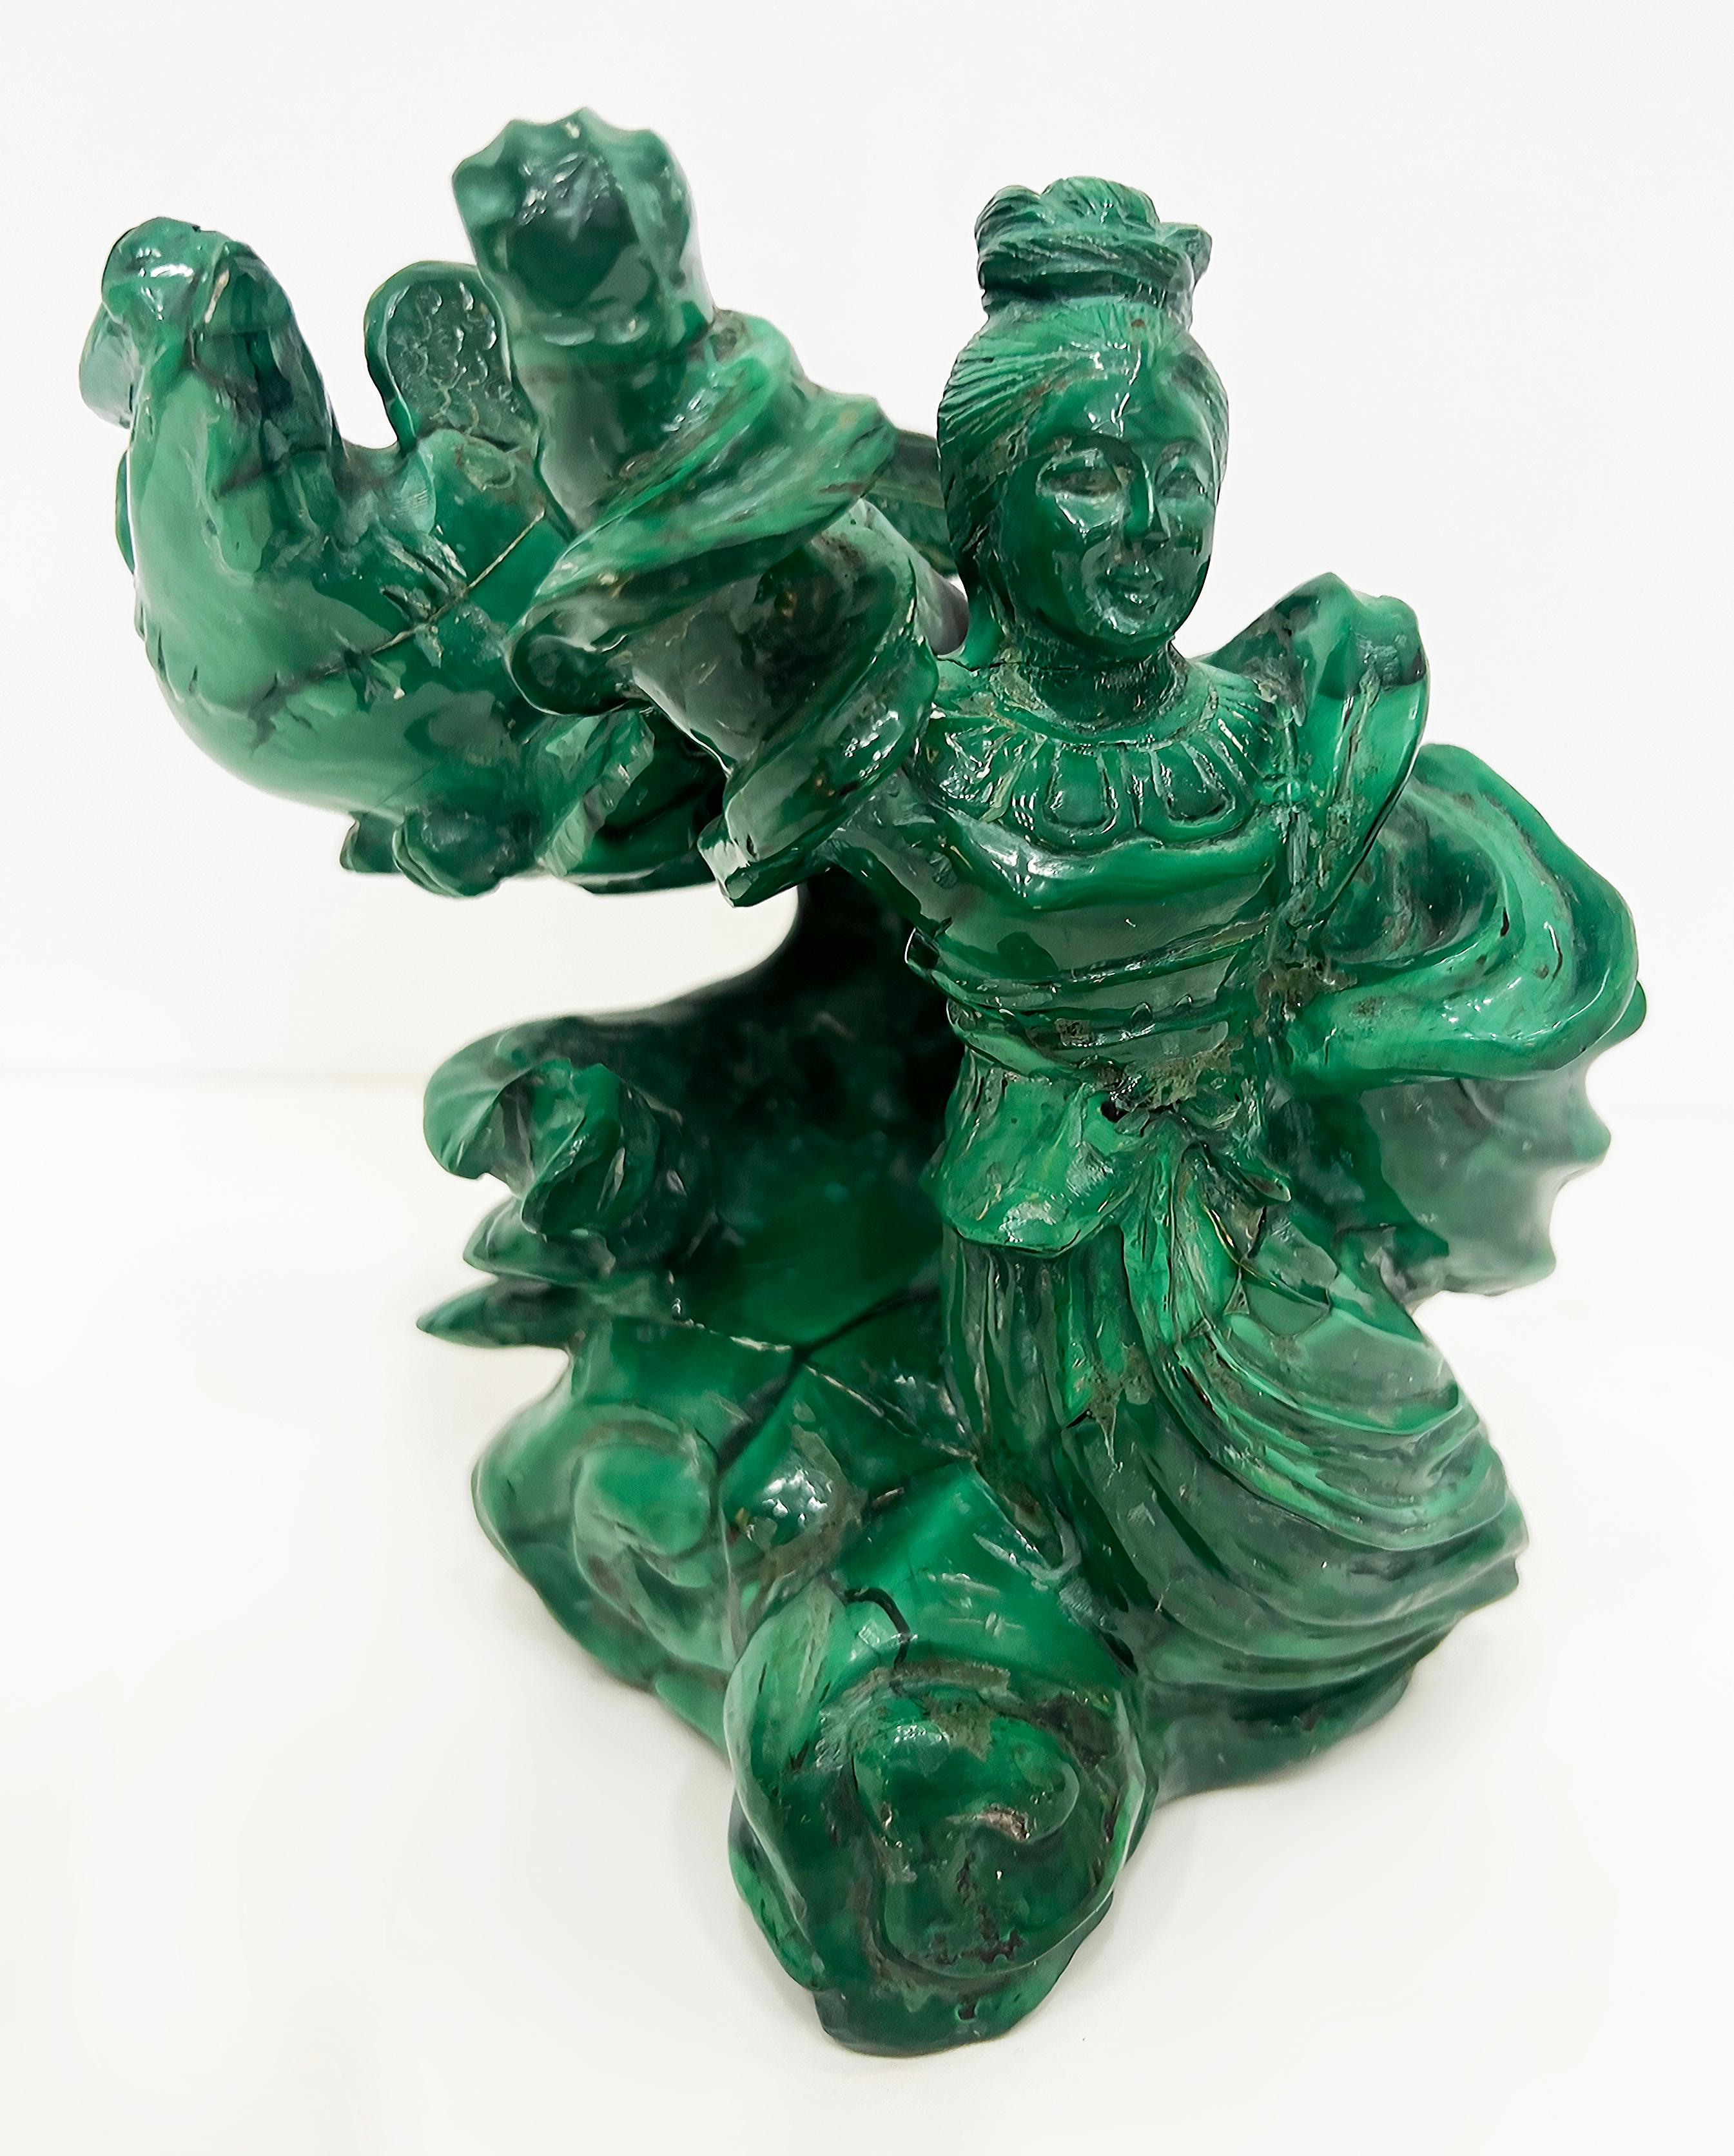 Vintage Chinese Carved Malachite Guan Yin Statue, Phoenix Bird Surrounding  For Sale 1